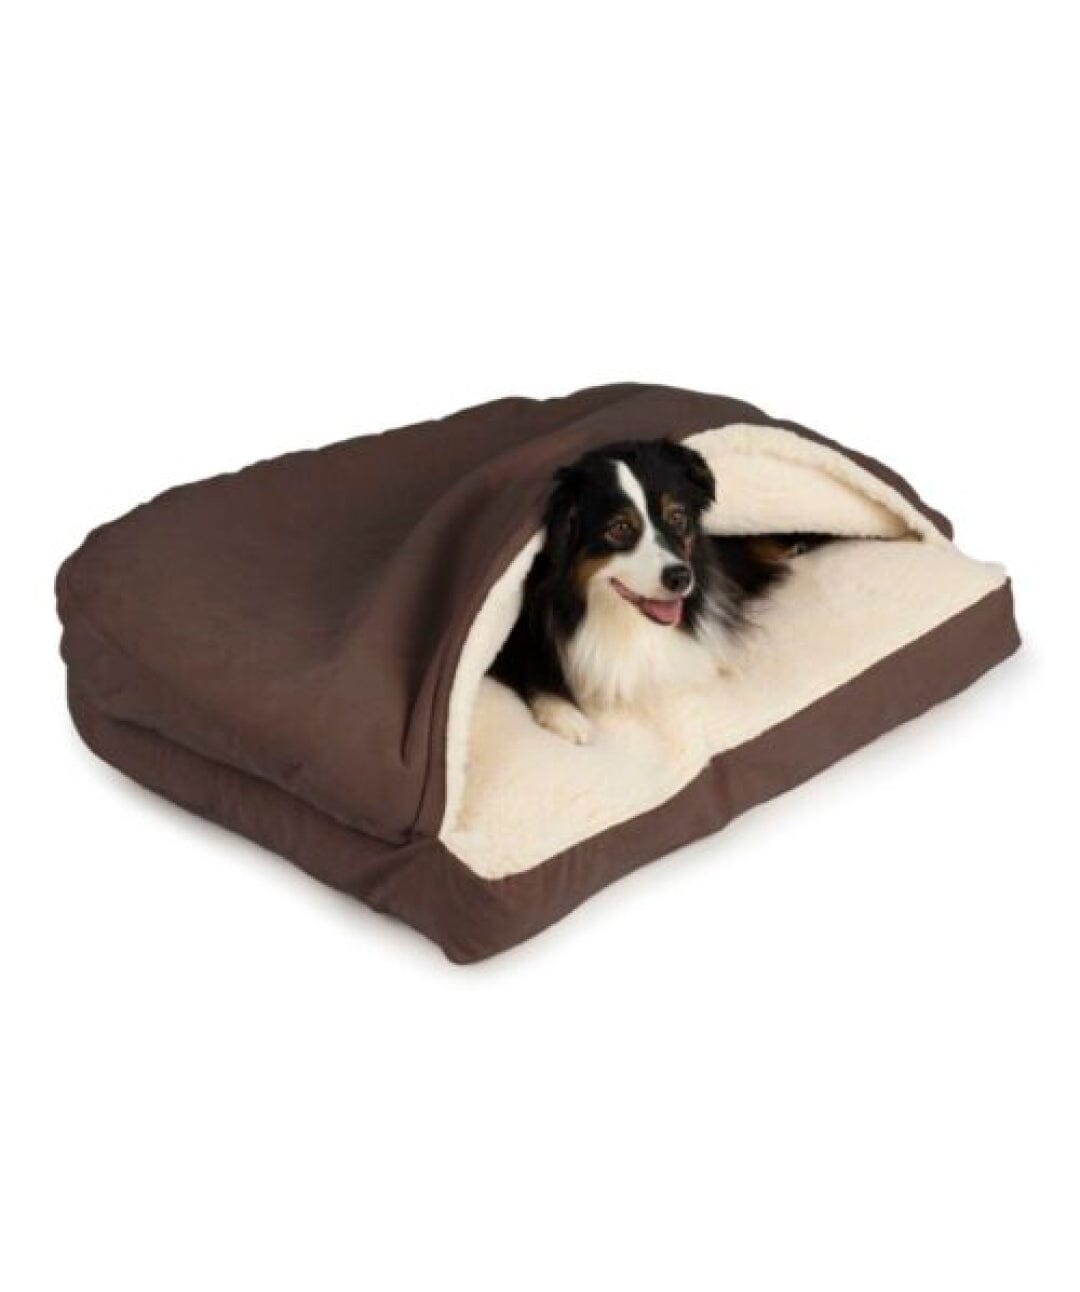 Snoozer Cozy Cave Rectangle Dog Bed Dog bed Snoozer Pet Products Small Hot Fudge Luxury Microsuede